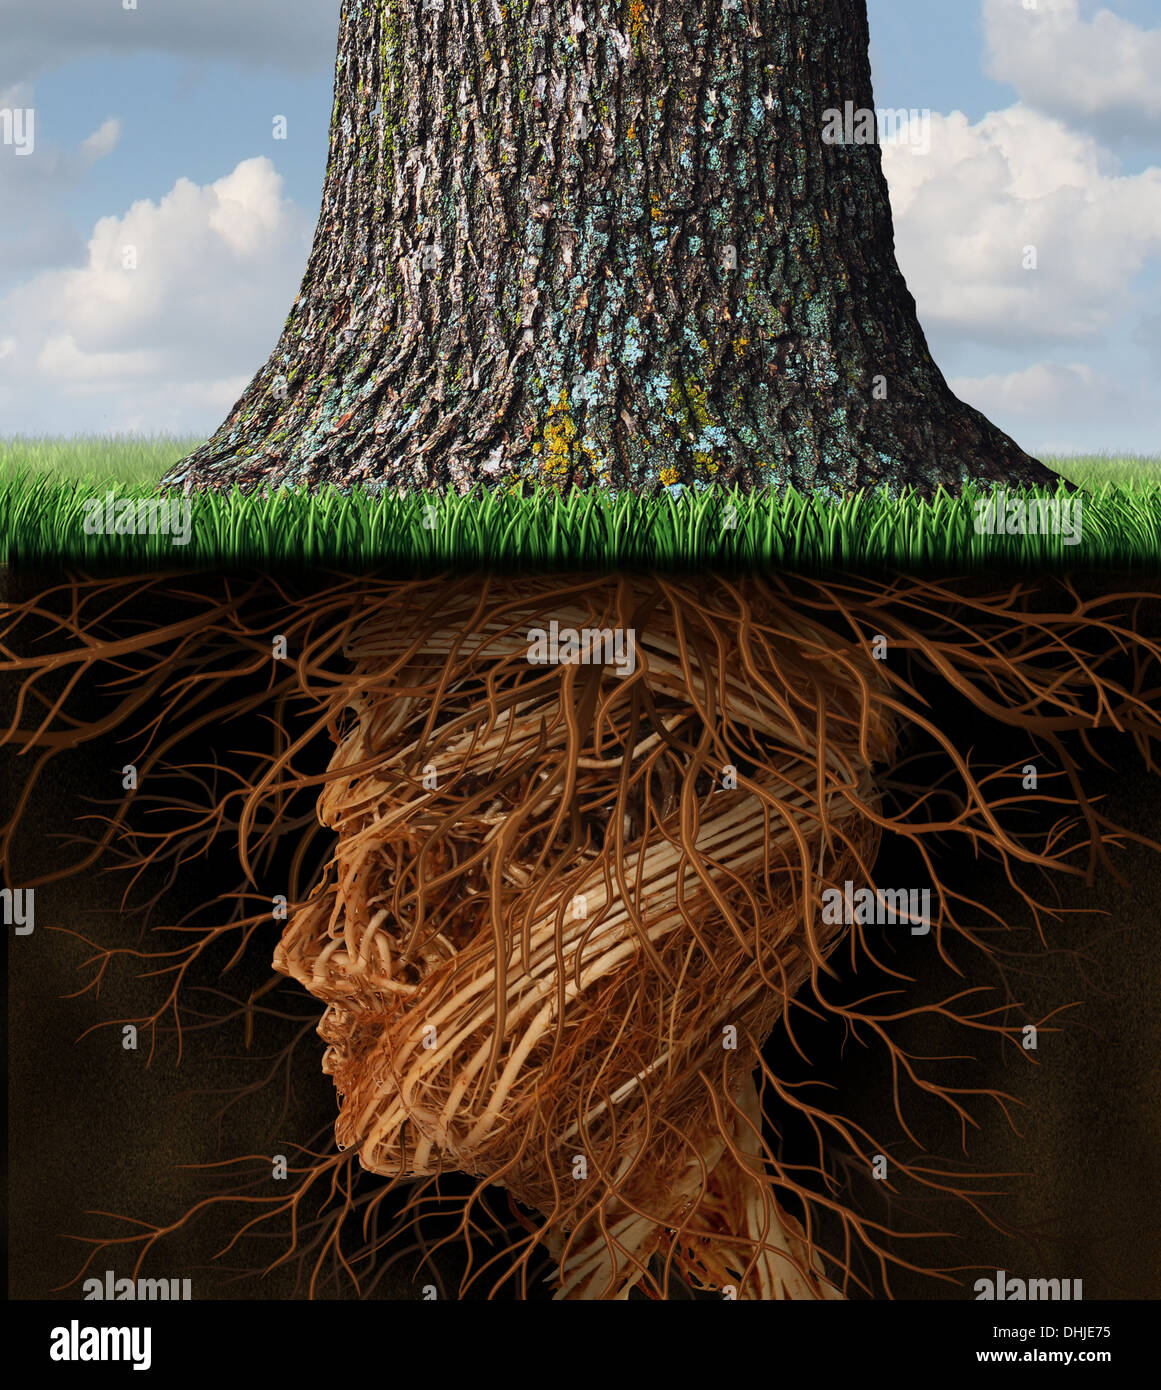 Take root and taking roots business and health care concept with  underground tree roots in the shape of a human head as a tall tree grows  above as an icon of growth